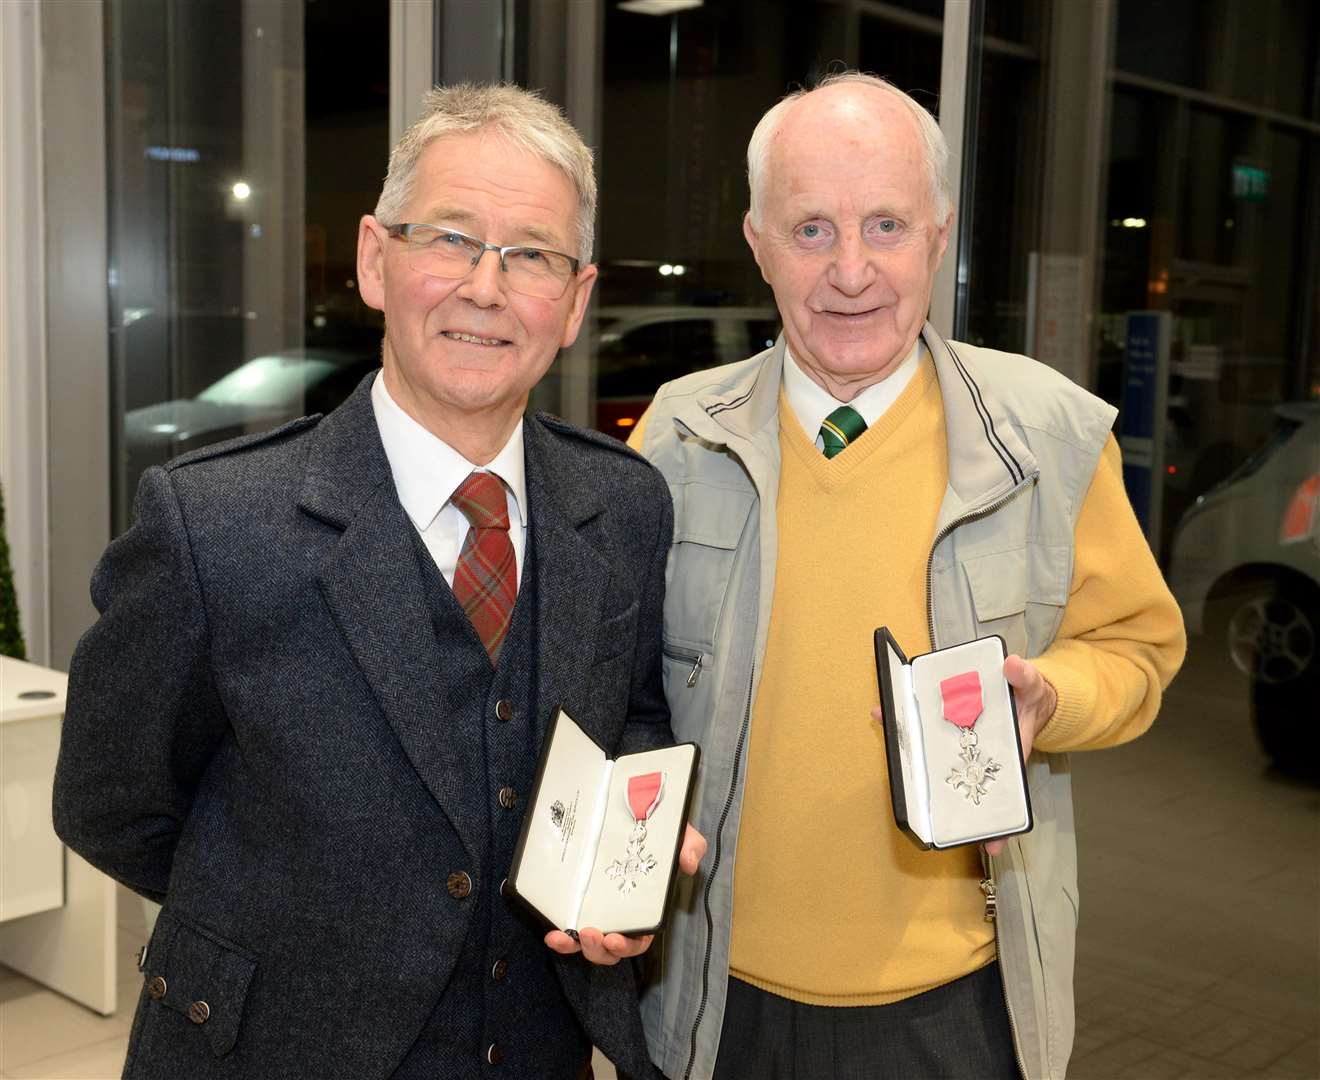 Organiser Calum Munro and founder Gerry Grant with MBE's. Picture: Gary Anthony